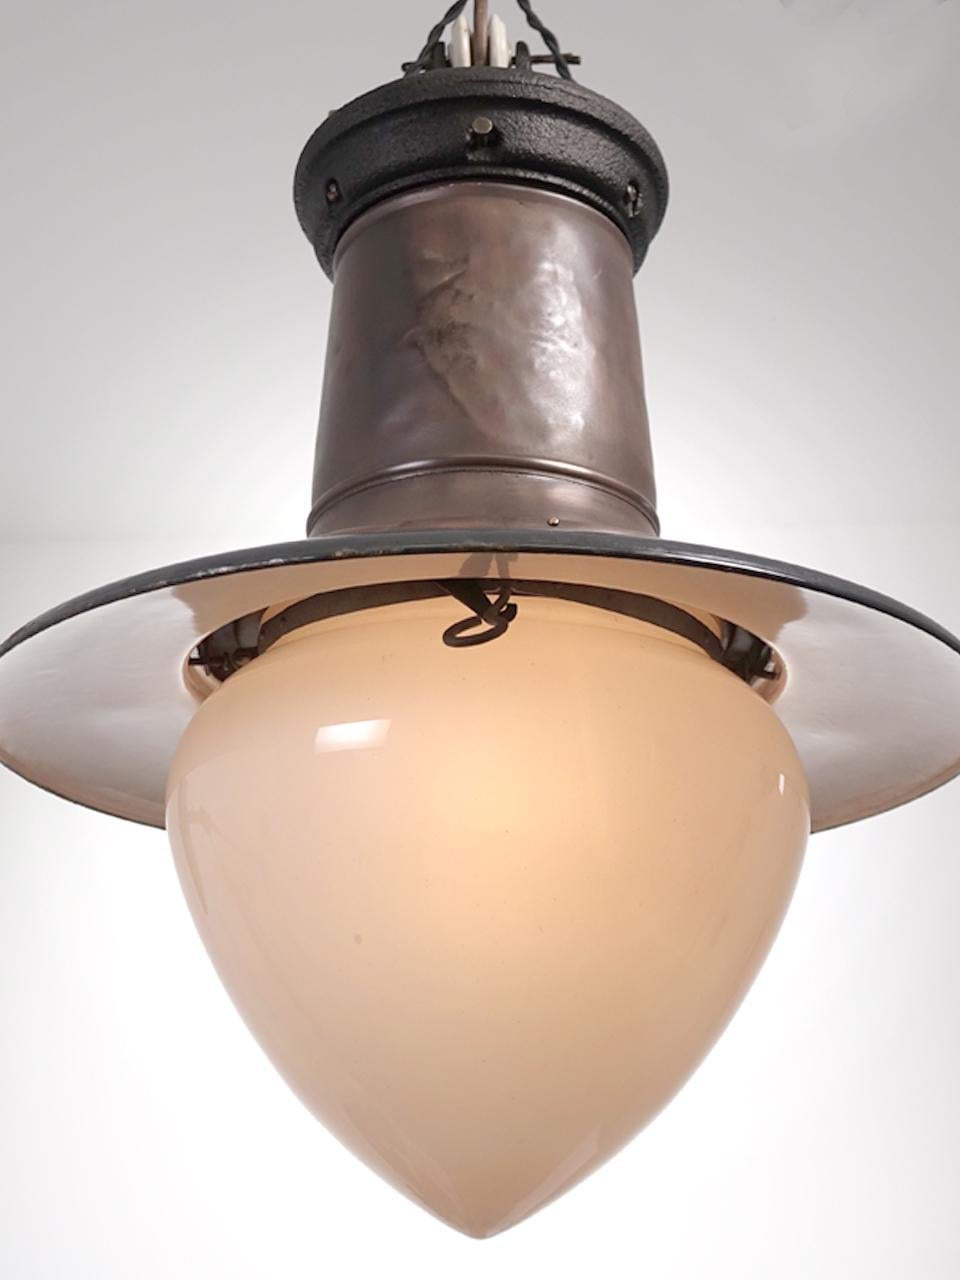 The finish of the bright copper and dark gray porcelain have just the right look. In addition the original white acorn milk glass dome make this impressive lamp a real standout. It has a 20 inch diameter shade and stands 28 inches tall. I believe